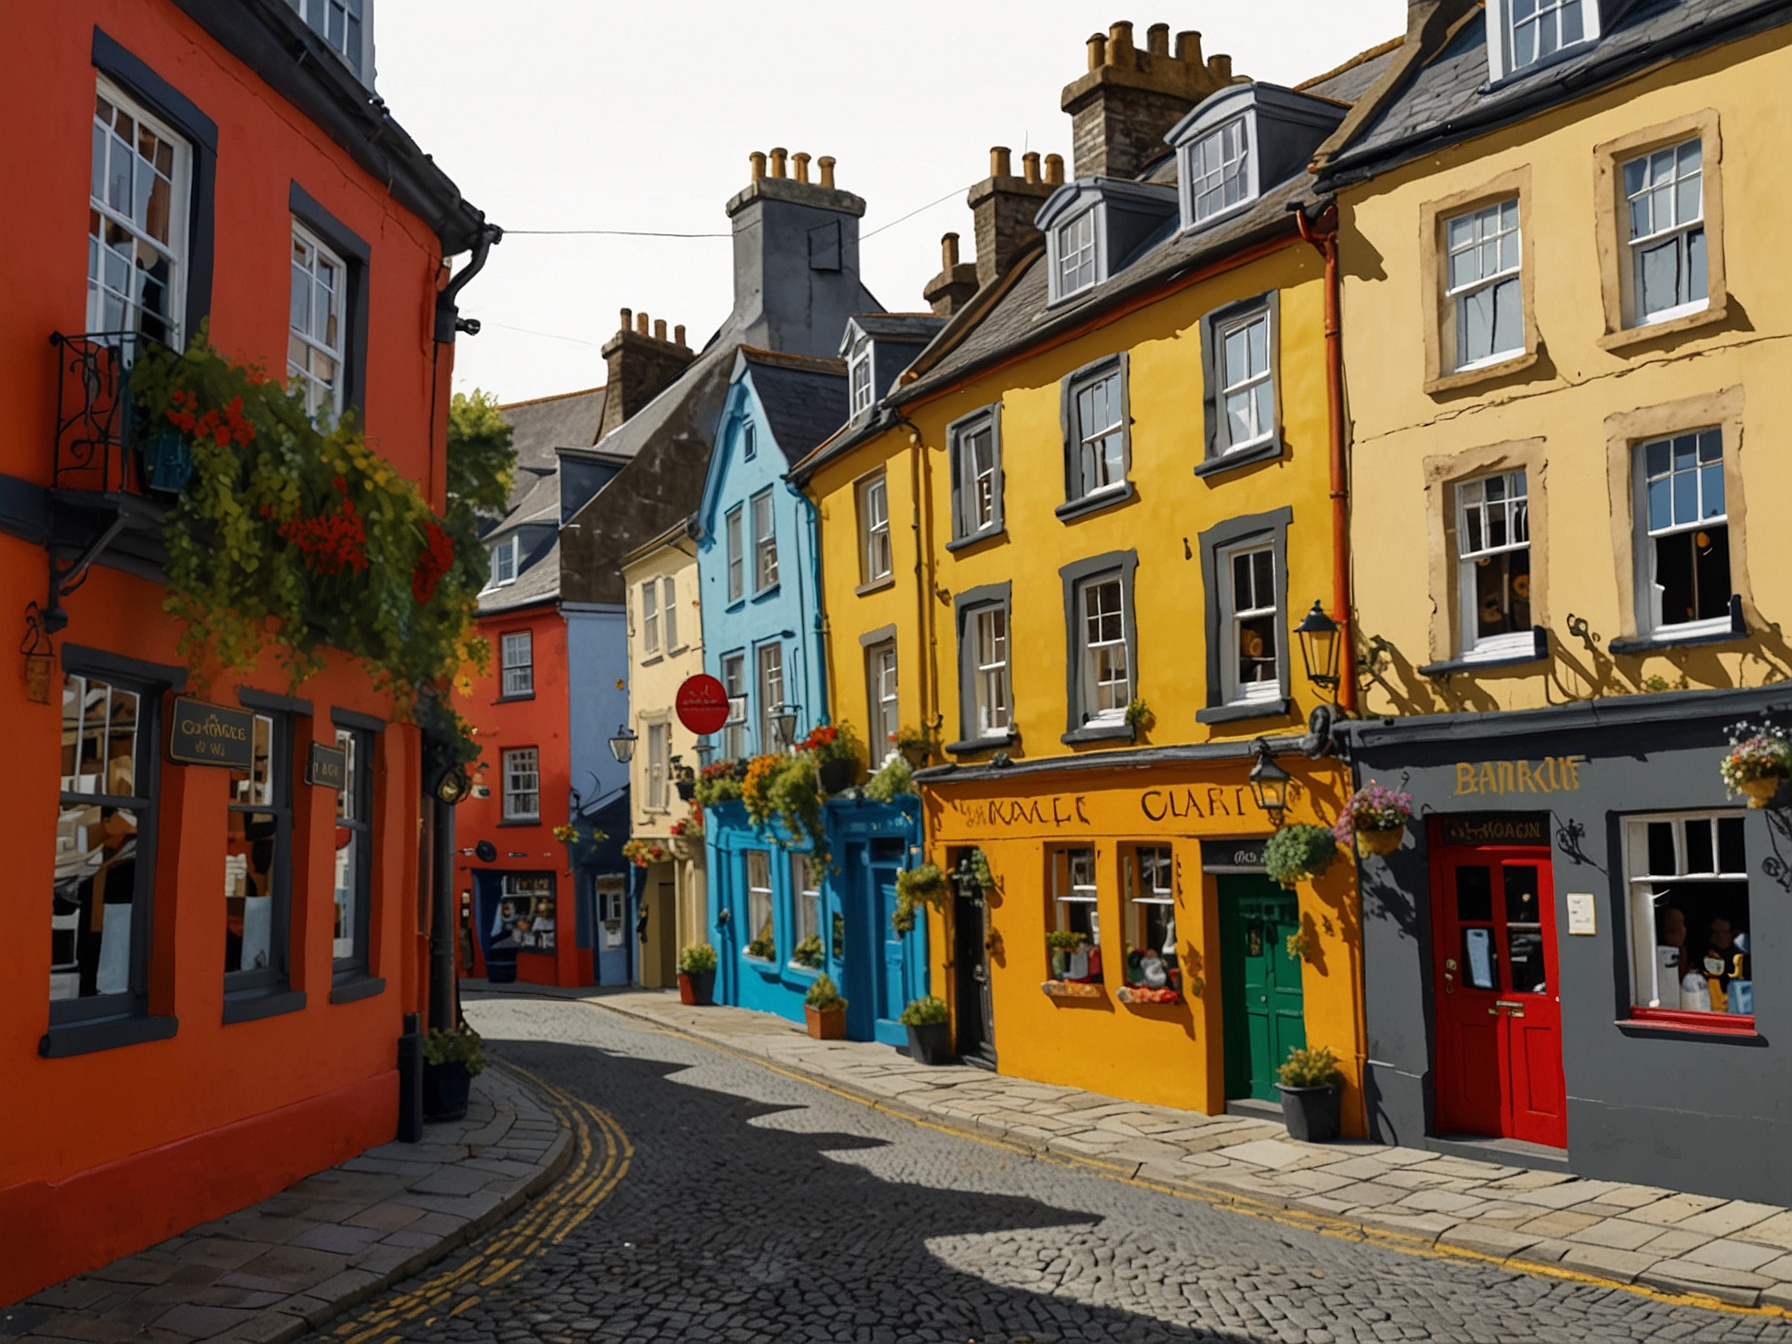 A picturesque street in Kinsale with vividly colored buildings, including a canary yellow café and vibrant red pub, reflecting the town's lively spirit and welcoming atmosphere.